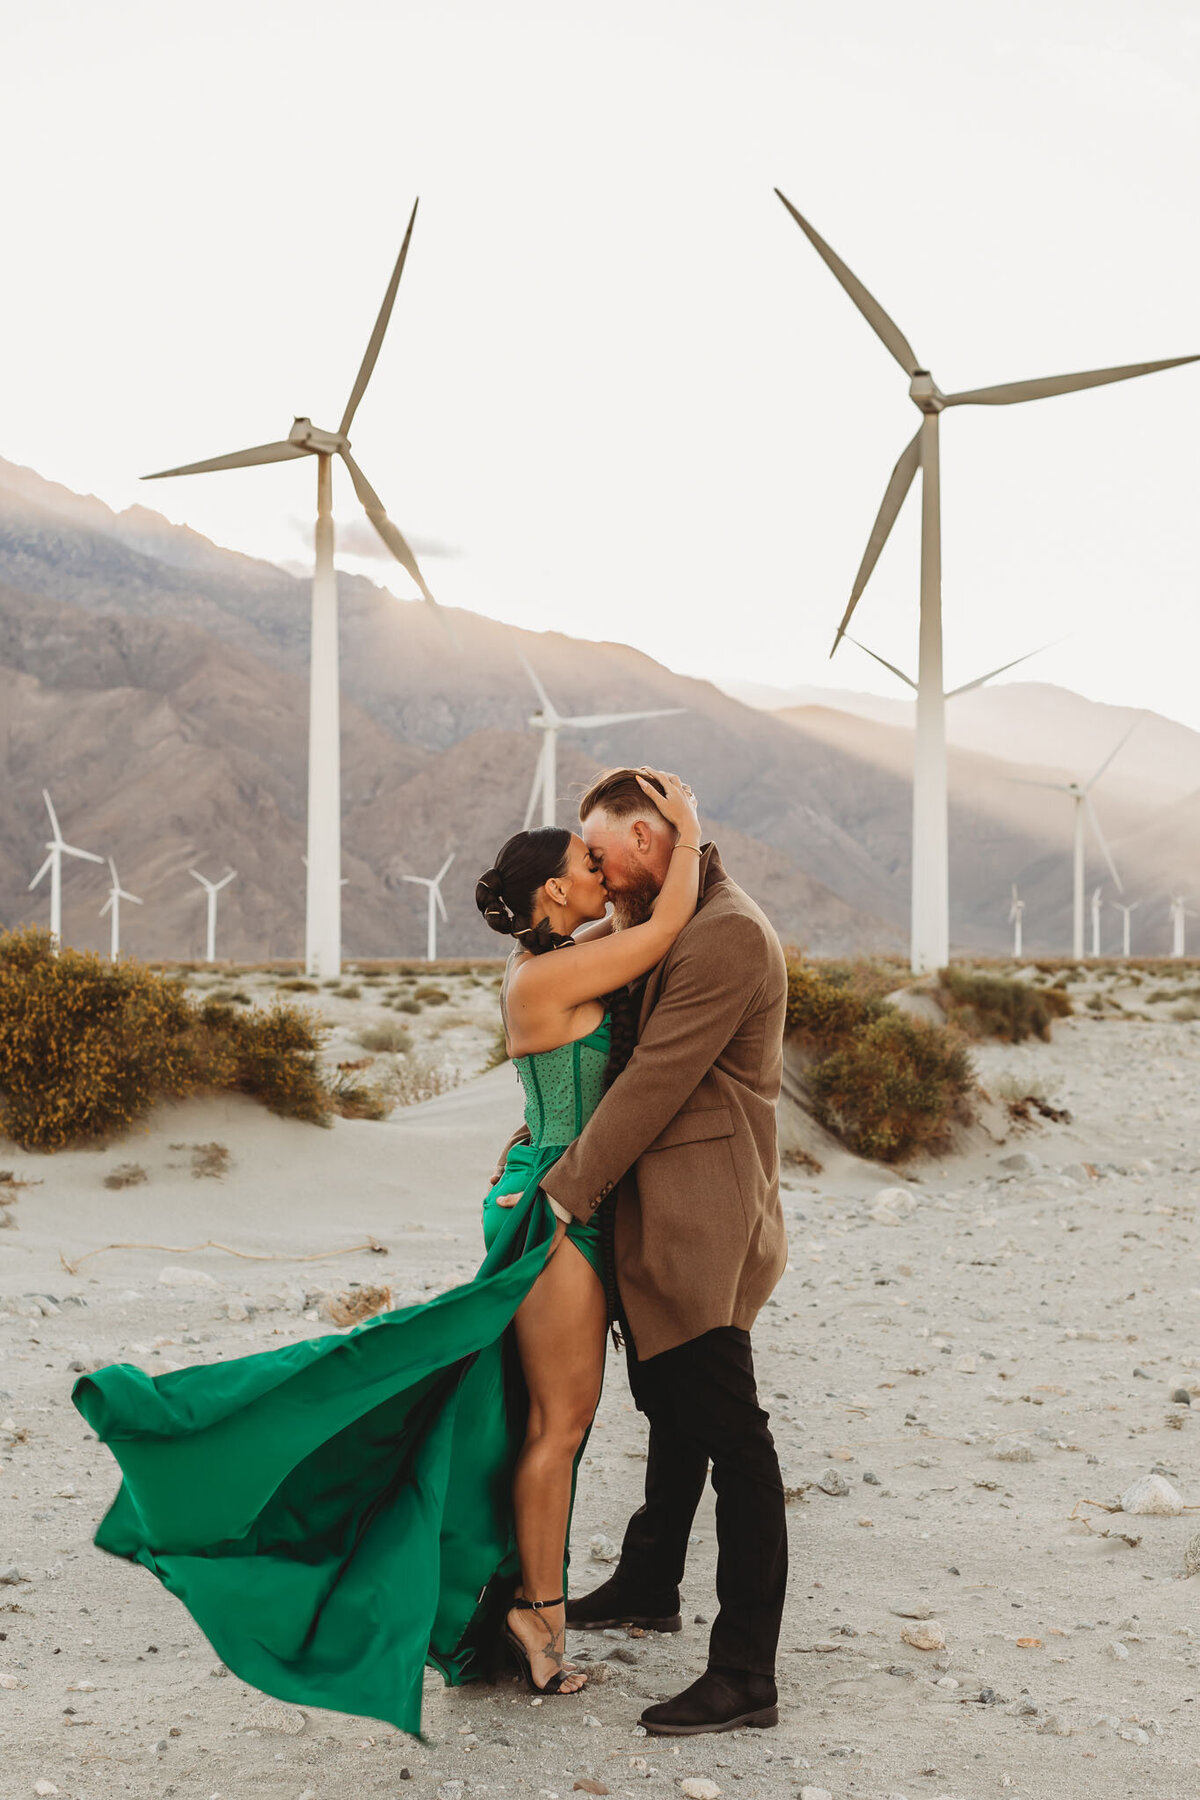 melissa-fe-chapman-photography-Palm-Springs-Windmills-Engagement-Session 1-6